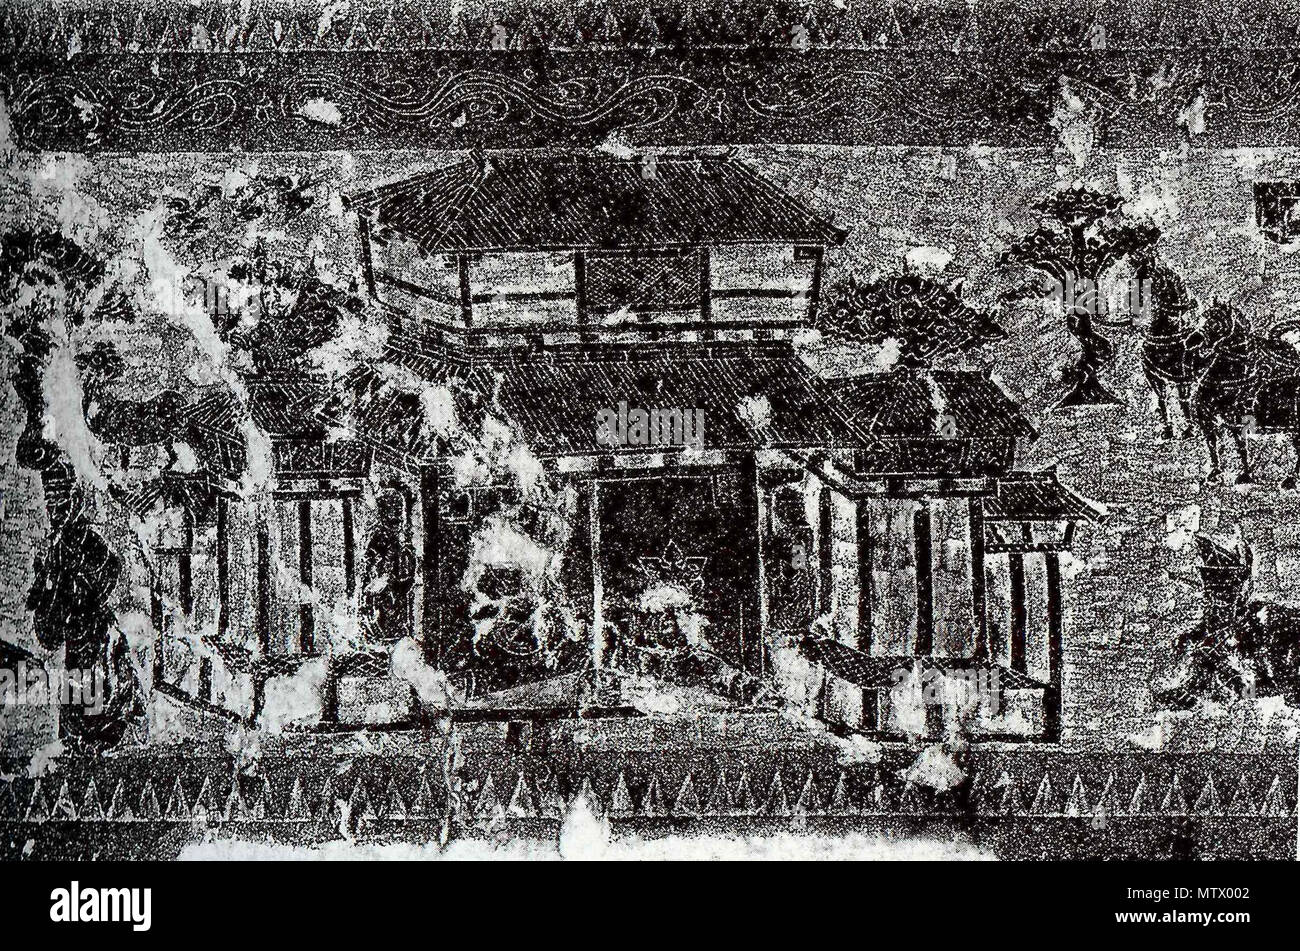 . A rubbing of a Chinese Han Dynasty (202 BC – 220 AD) pictorial stone (i.e. the Yinan stone carving of Shandong province, China) showing an ancestral worship hall (citang 祠堂) with closed doors, a person outside making a sacrificial offering to his ancestors, and horses and trees in the background. 202 BC to 220 AD. Unknown 530 Rubbing of a Han Citang Stock Photo